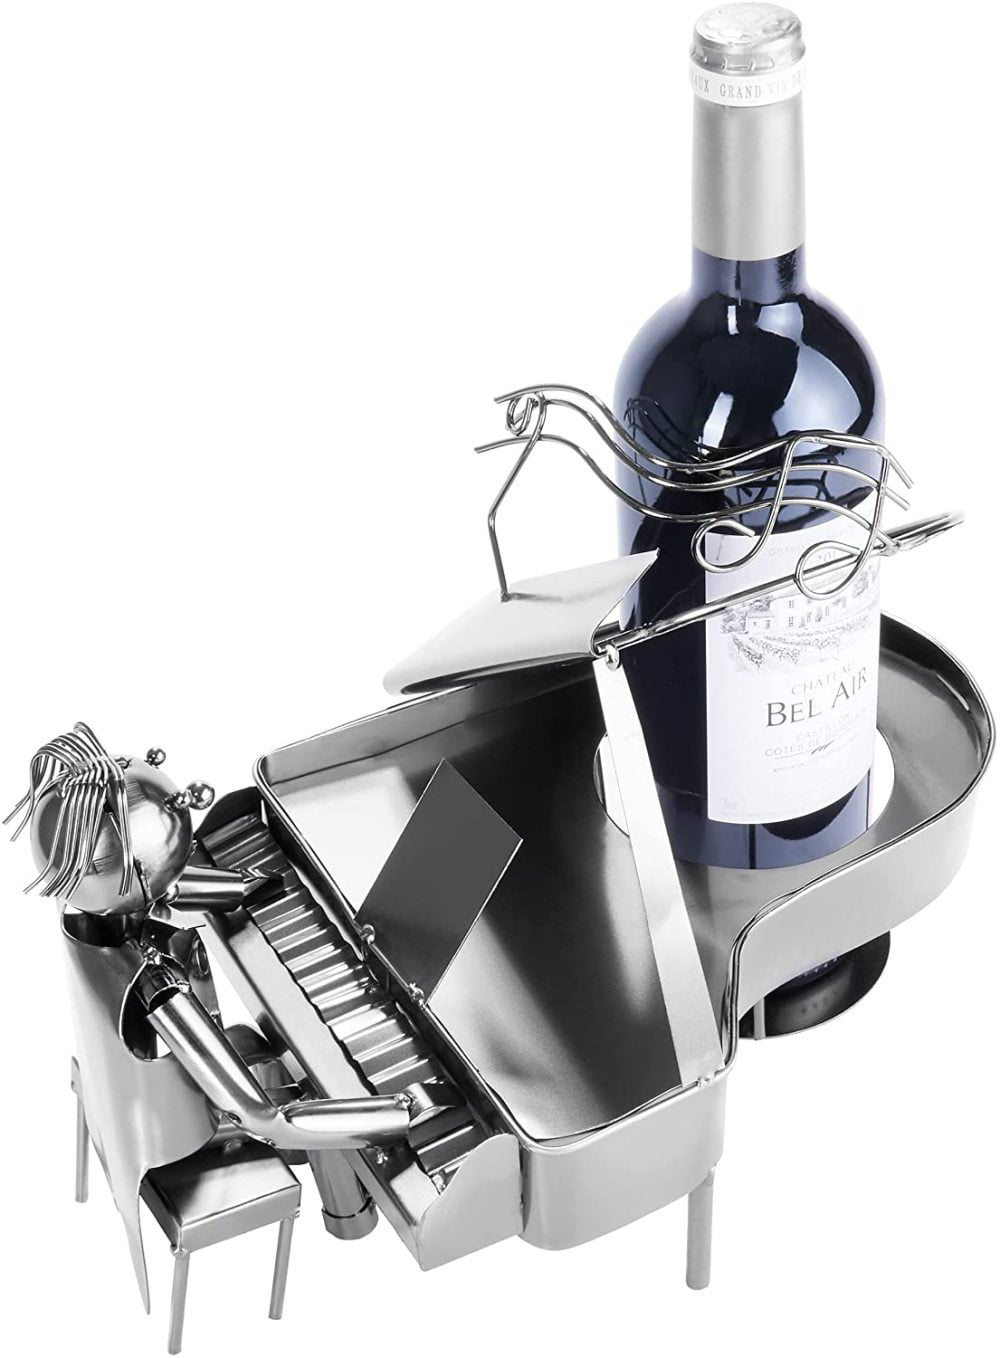 with Greeting Card BRUBAKER Wine Bottle Holder Piano Table Top Metal Sculpture 